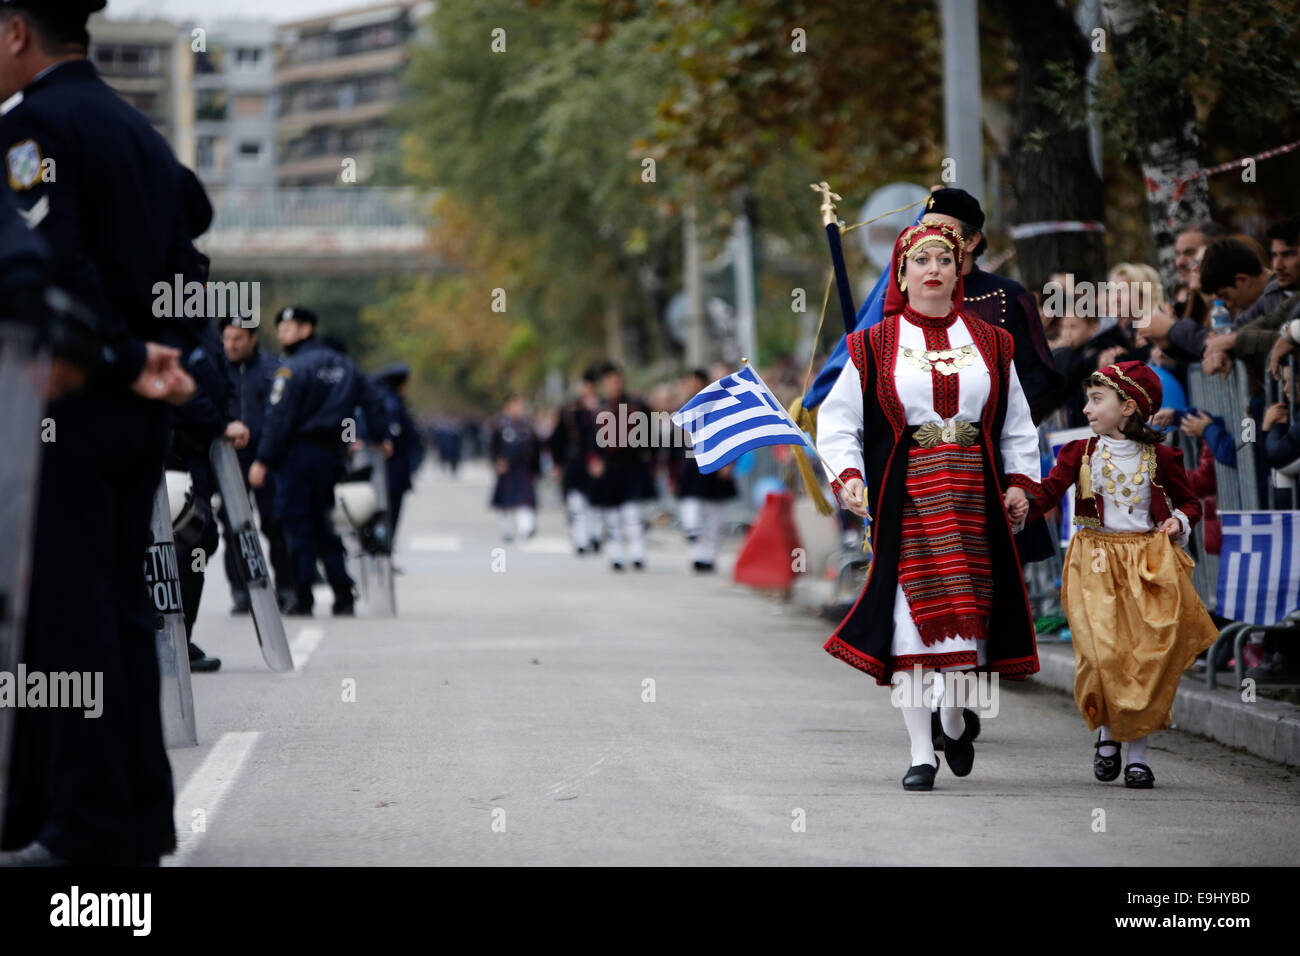 Thessaloniki, Greece. 28th October, 2014. A girl dressed in a traditional costume holds the hand of a woman in traditional military uniform during a parade. The military parade commemorating Greece's entry into World War II has been held in Thessaloniki, Greece on October 28, 2014 Credit:  Konstantinos Tsakalidis/Alamy Live News Stock Photo